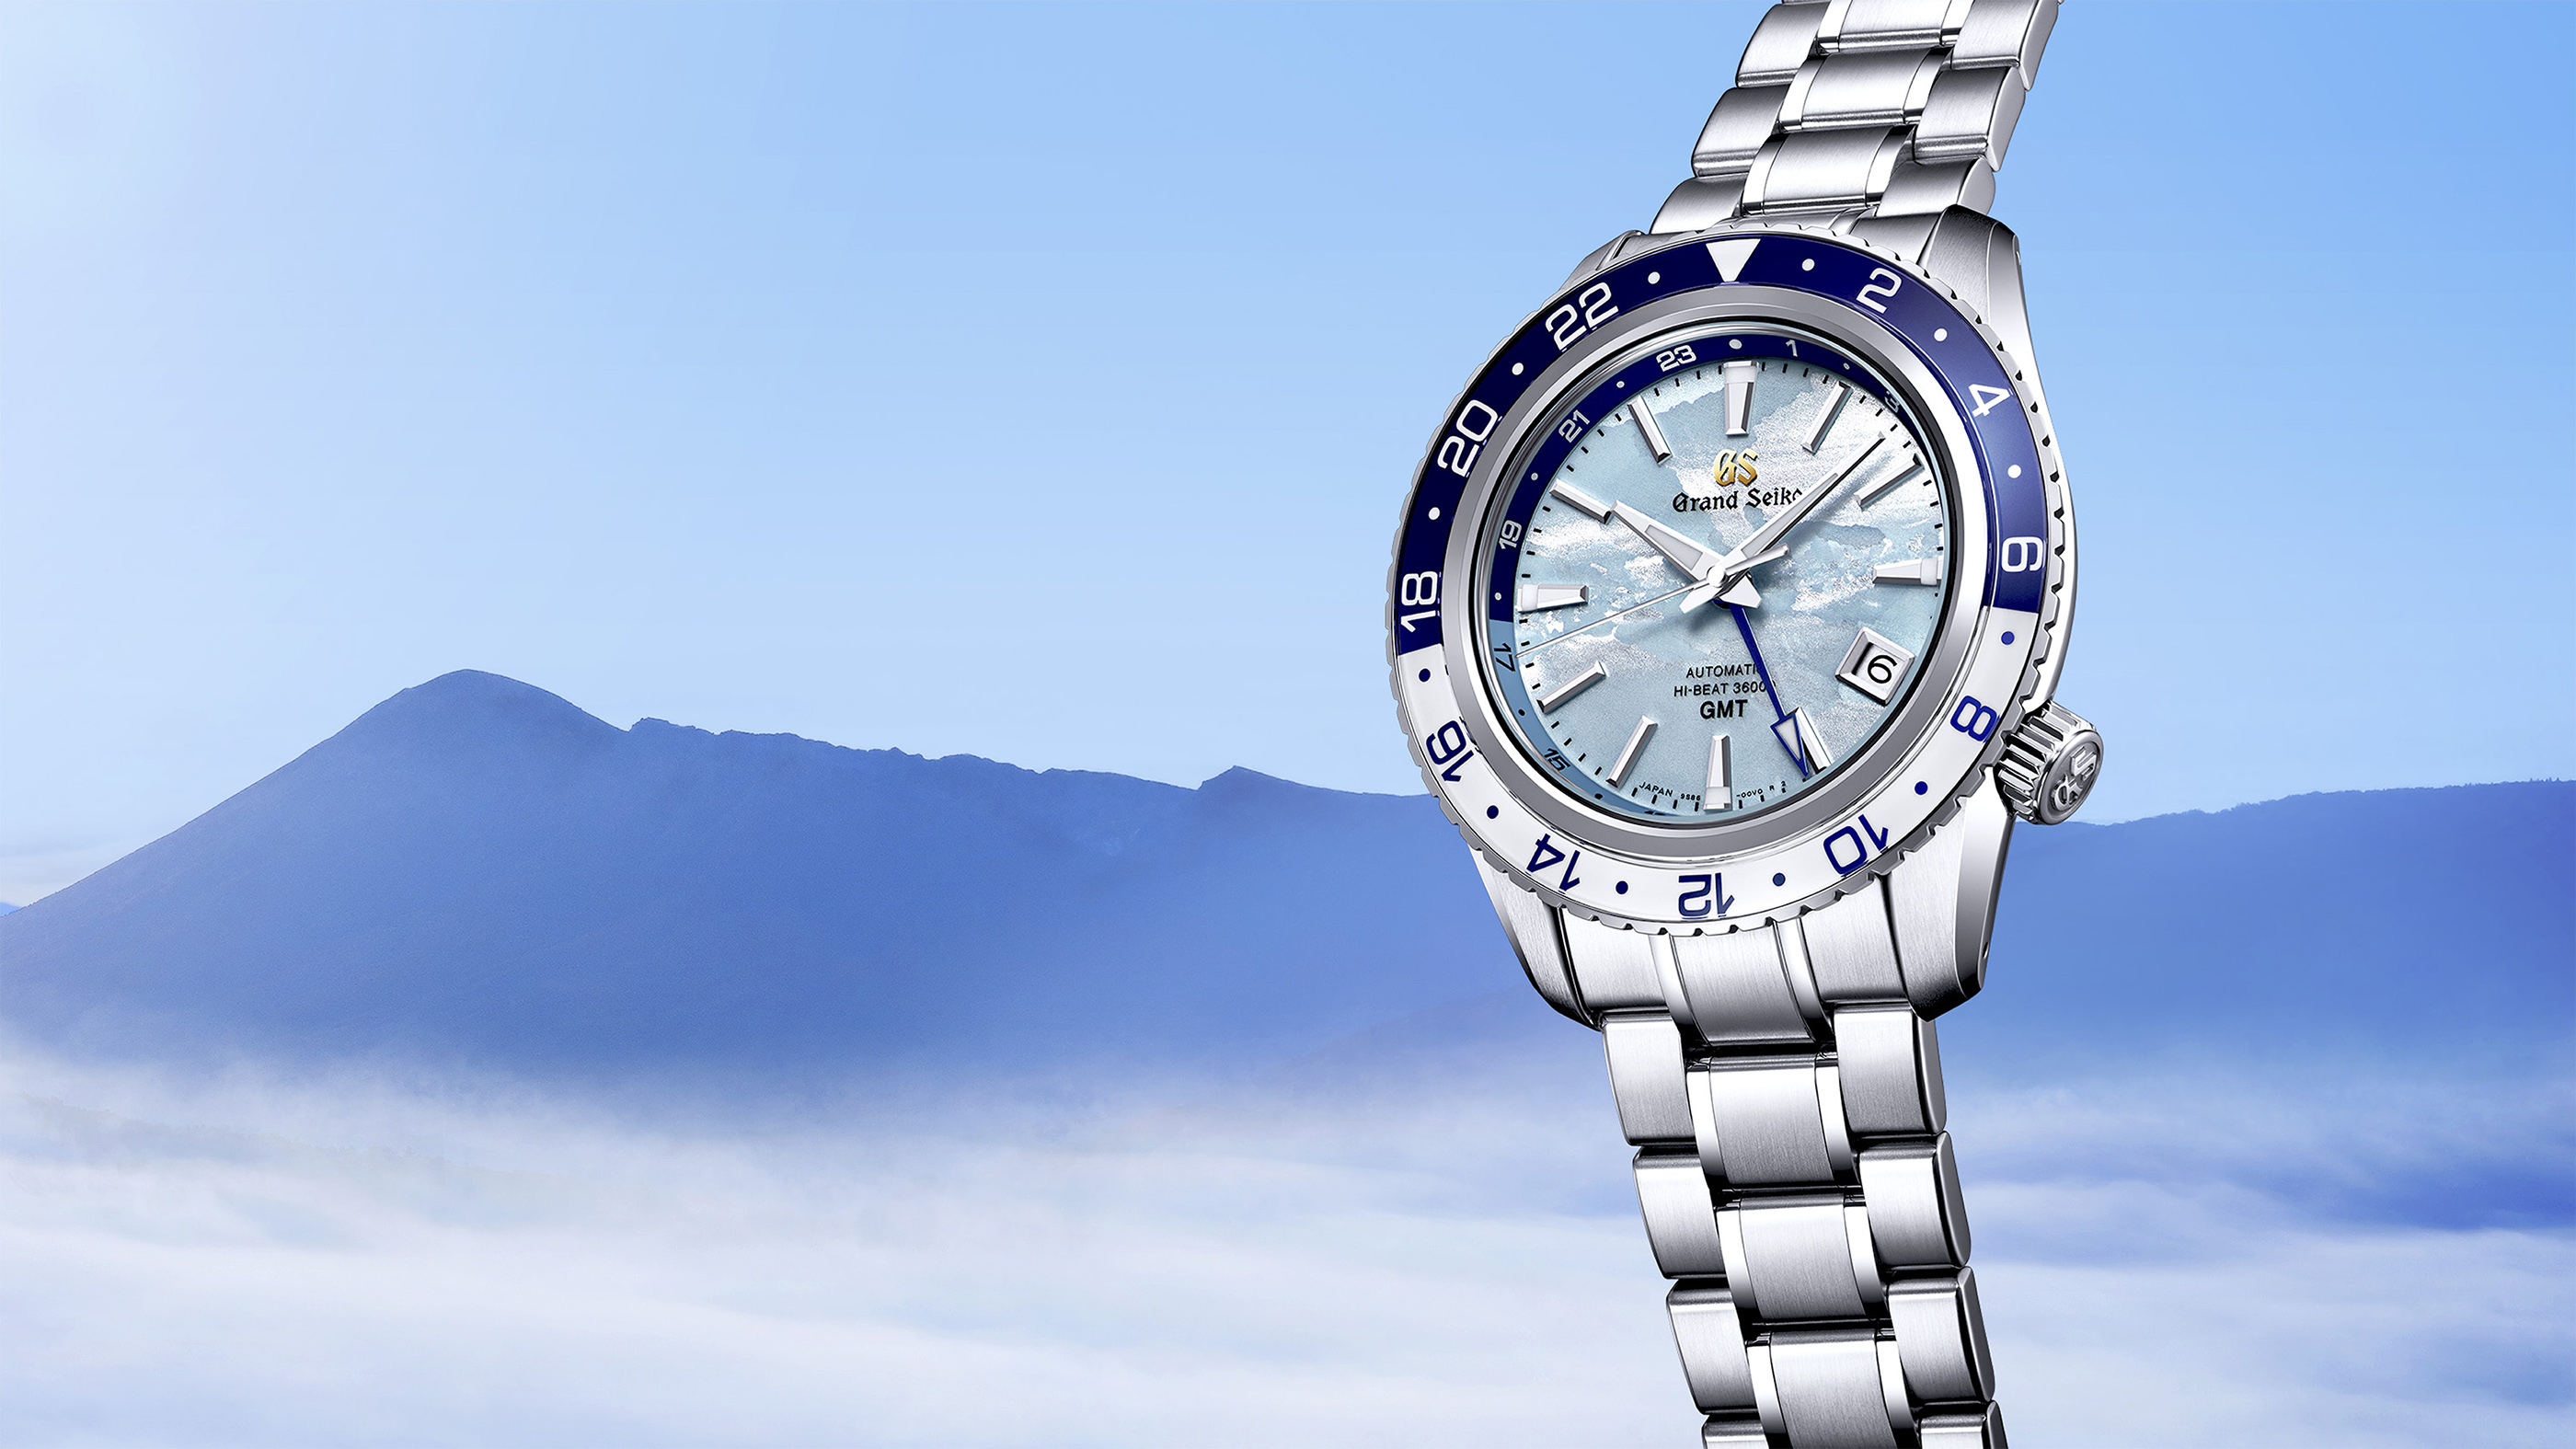 Grand Seiko marks 25 years of Caliber 9S with two new GMT watches 